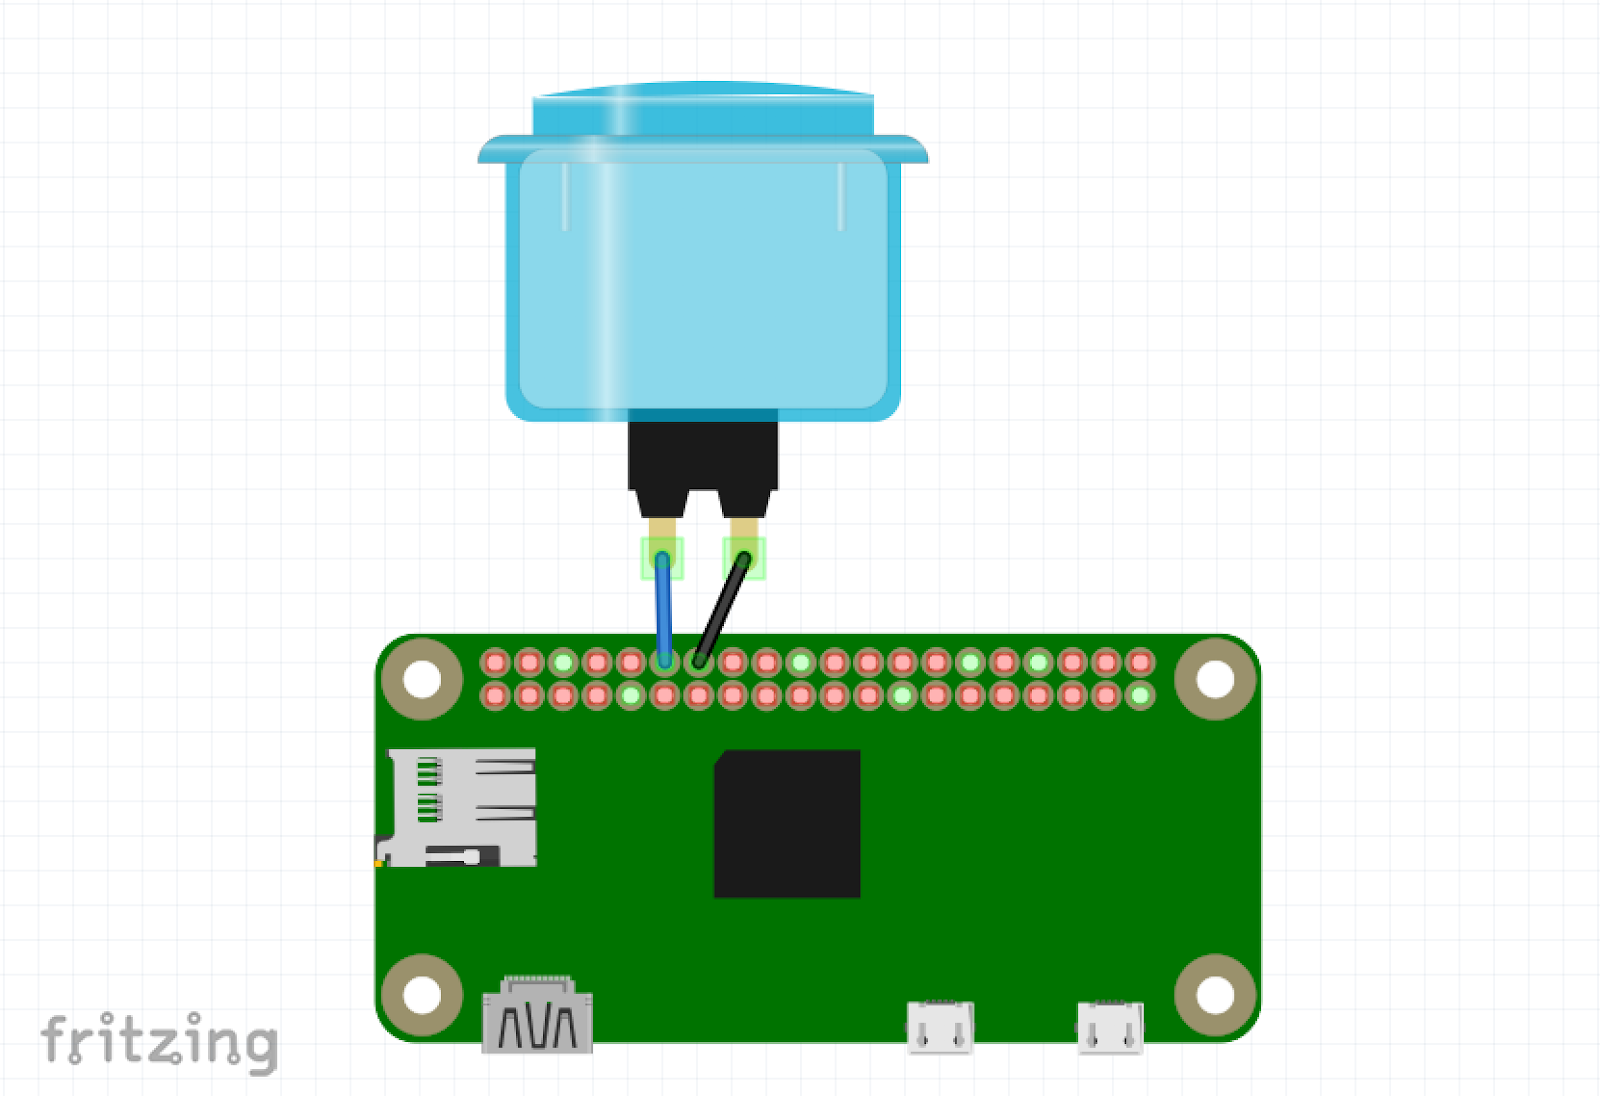 a fritzing diagram of a Raspberry Pi and a button plugged in to BCM pin 18 and GND.